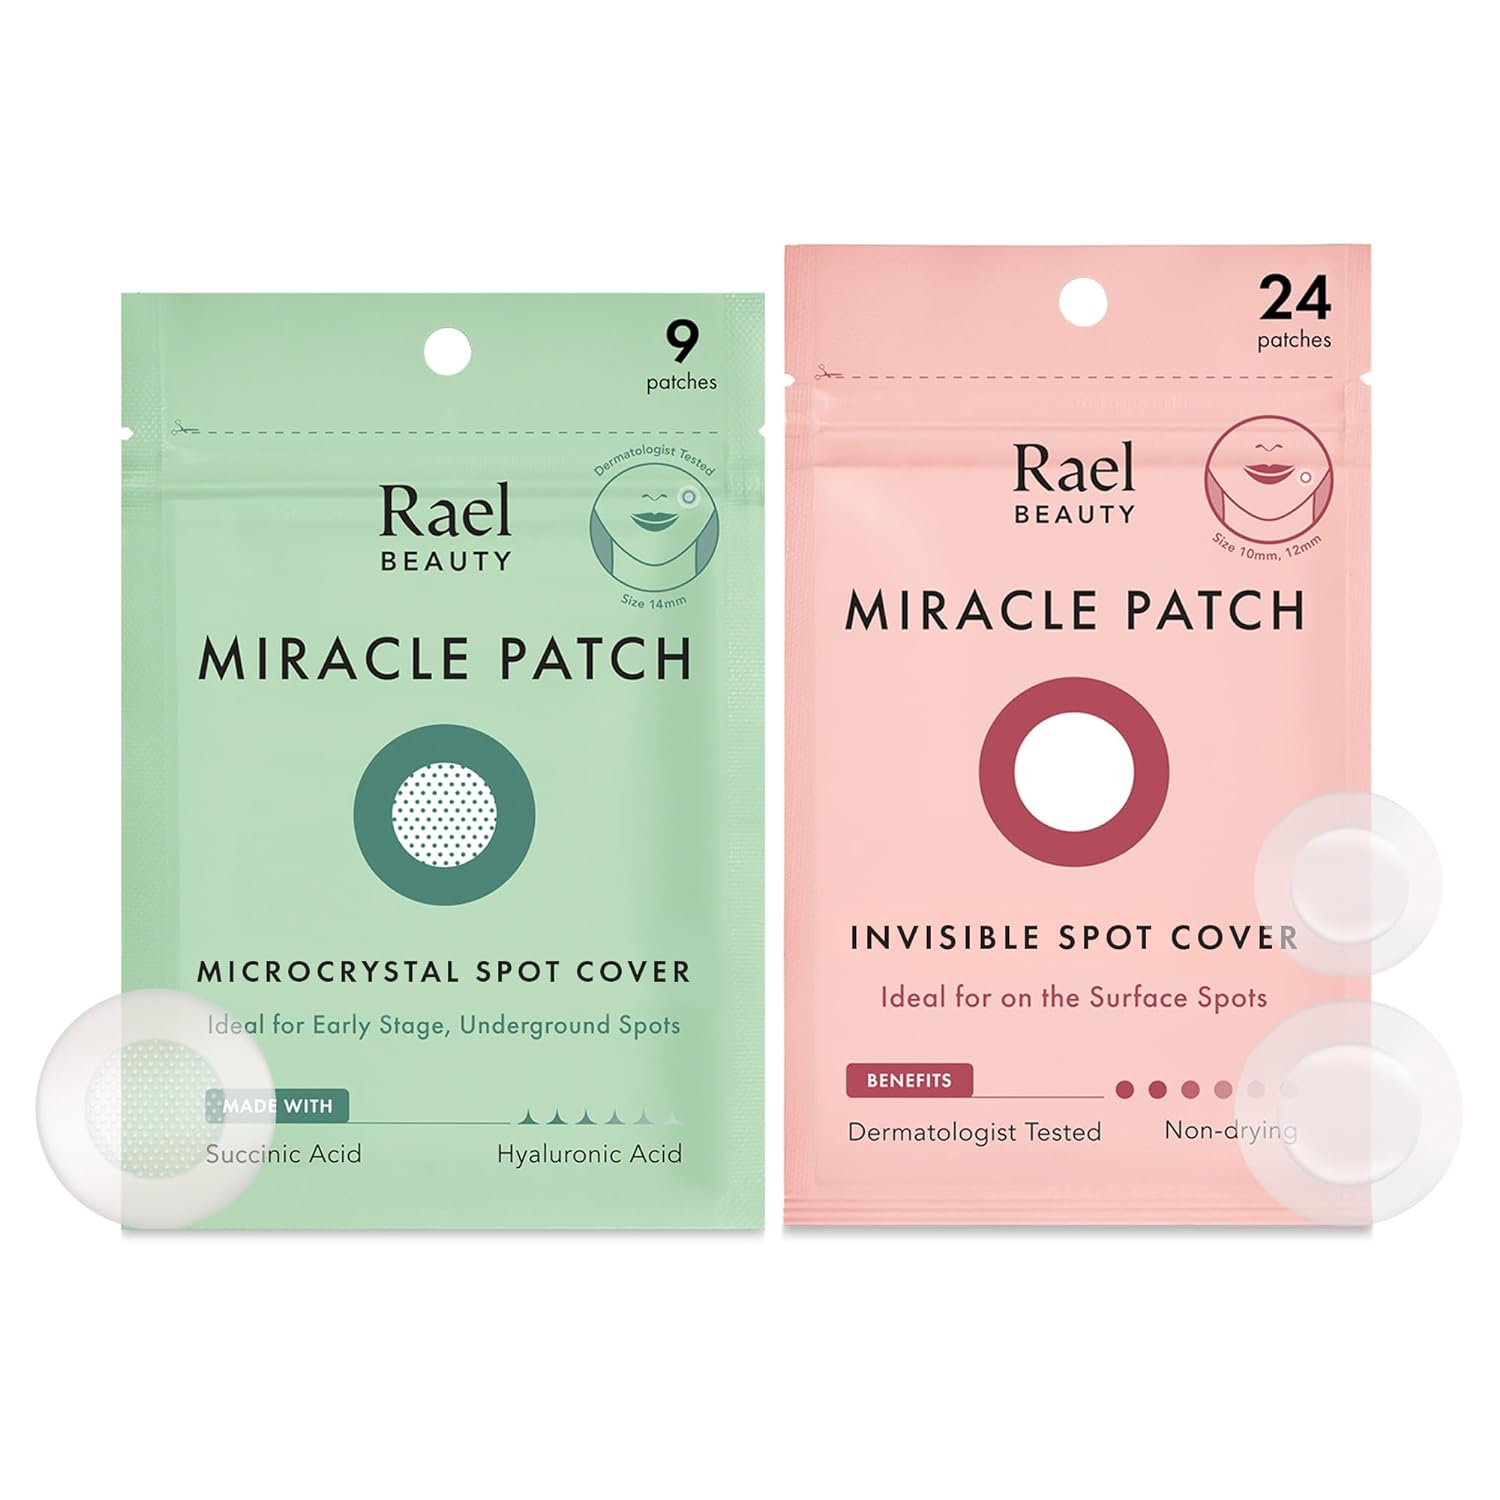 Rael Pimple Patches, Miracle Patch Bundle - Hydrocolloid Acne Patch for Face, Zit & Blemish, Breakouts, All Skin Types, Vegan, Cruelty Free (Invisible & Microcrystal Spot Cover, 33 Count)